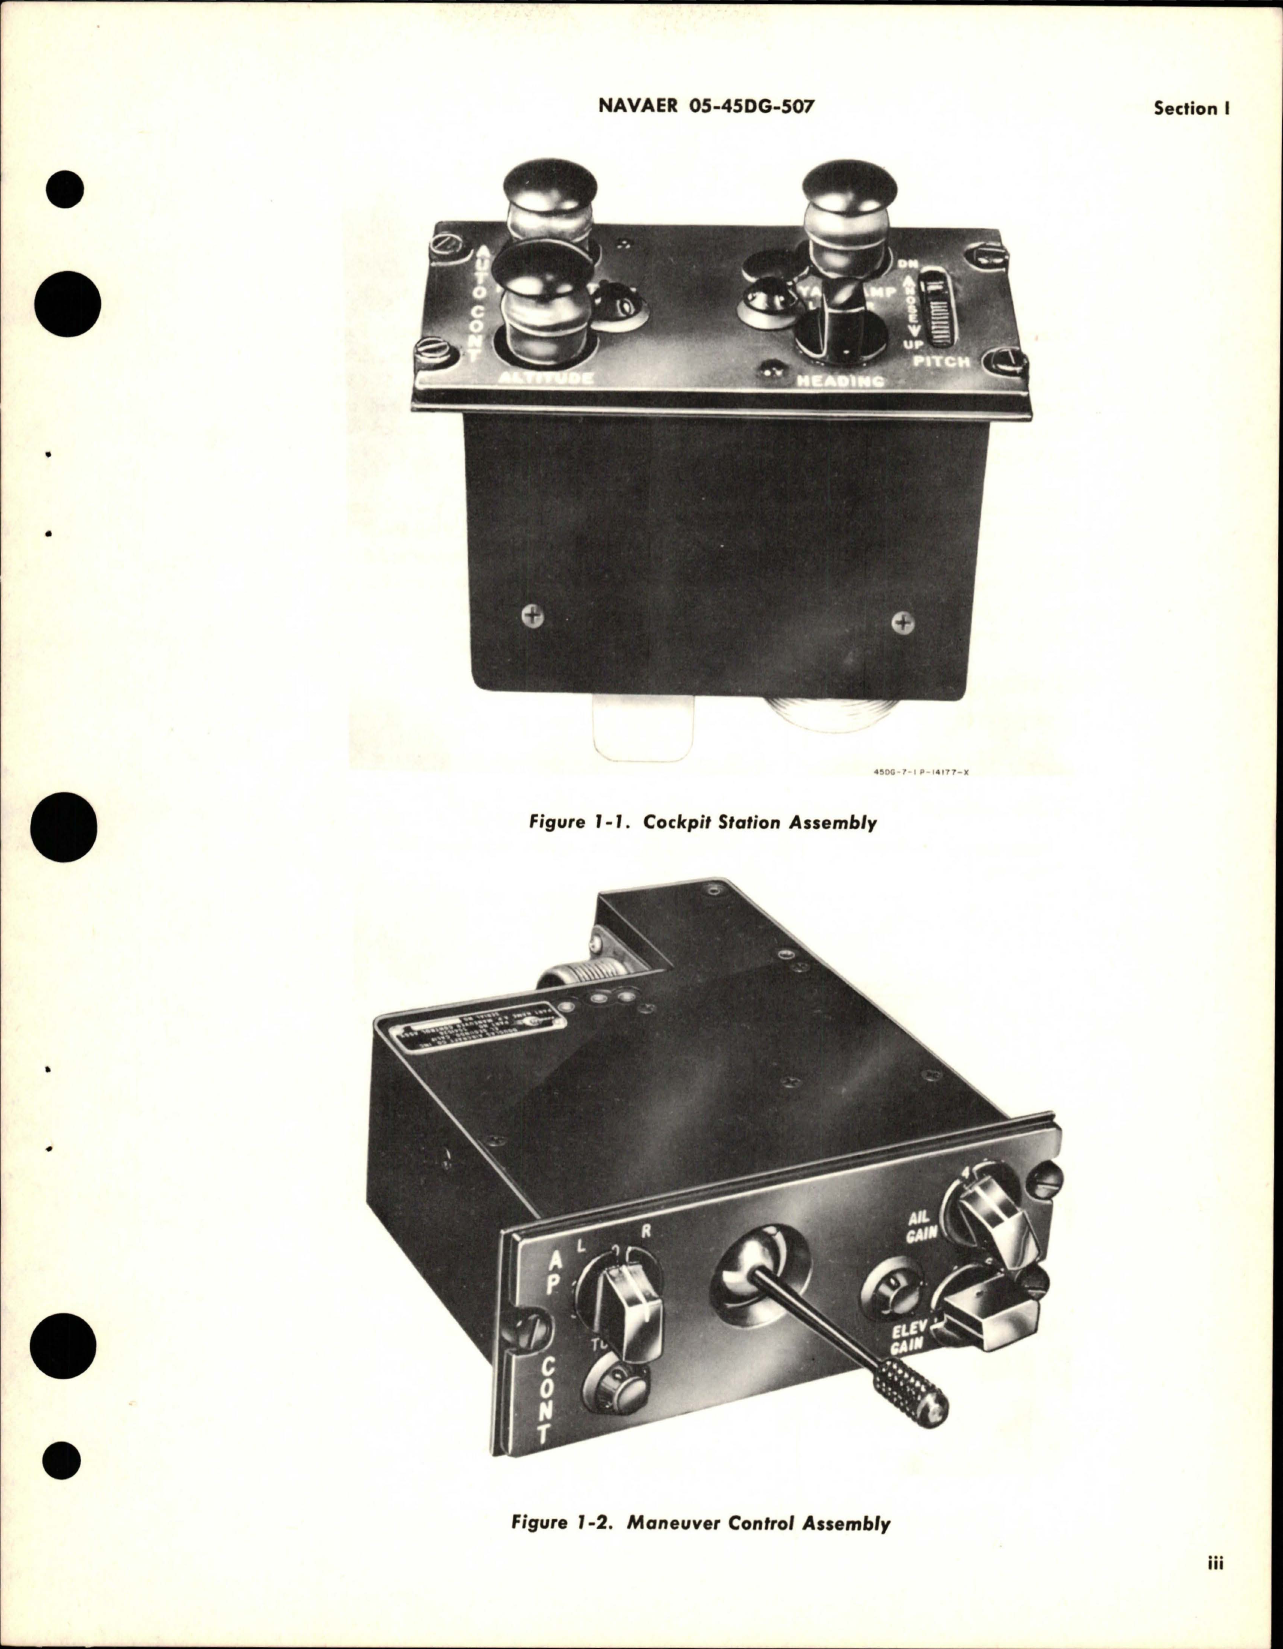 Sample page 5 from AirCorps Library document: Overhaul Instructions for Cockpit Station Assembly, Maneuver Control Assembly for D-1 Auto Control